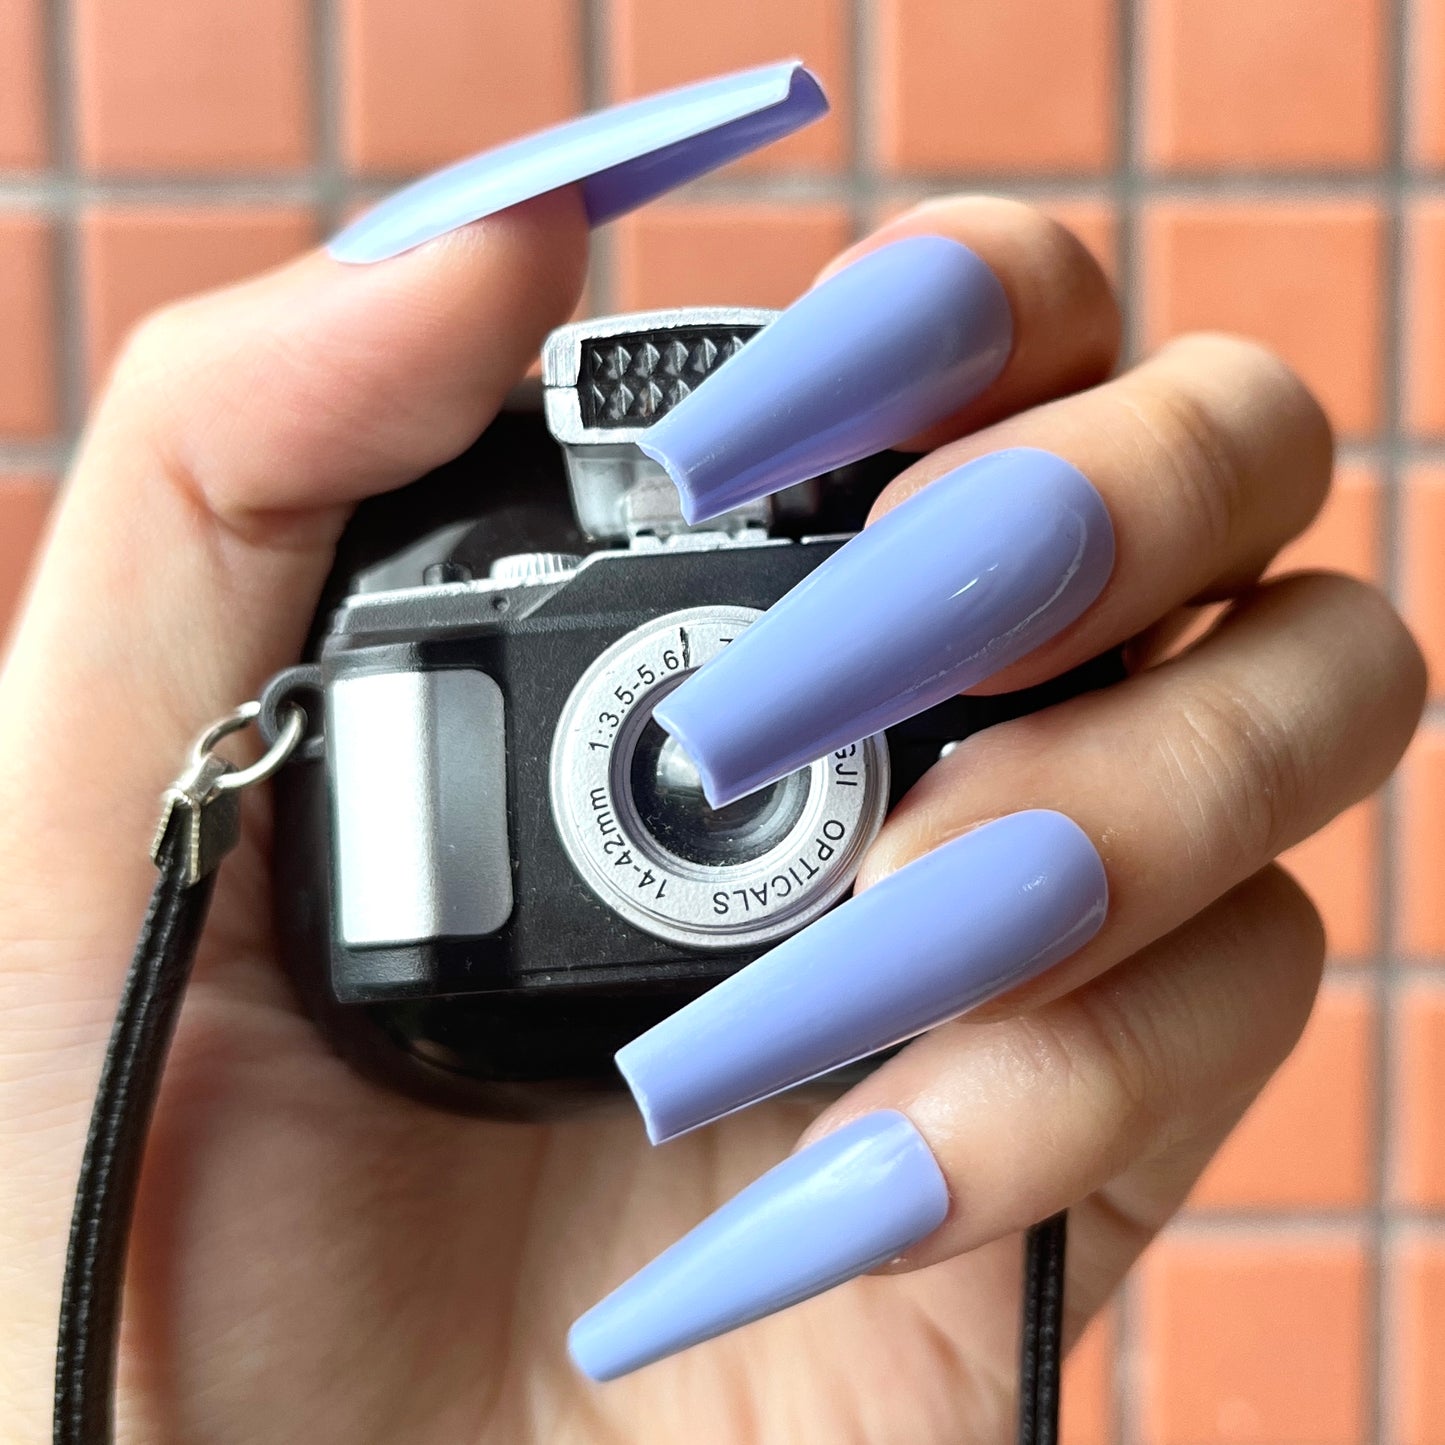 Pastel Color/ Solid Color Coffin Long Fake Nails Matte Blue S467 Press ons Flase Nails Press On Nails Tips Salon